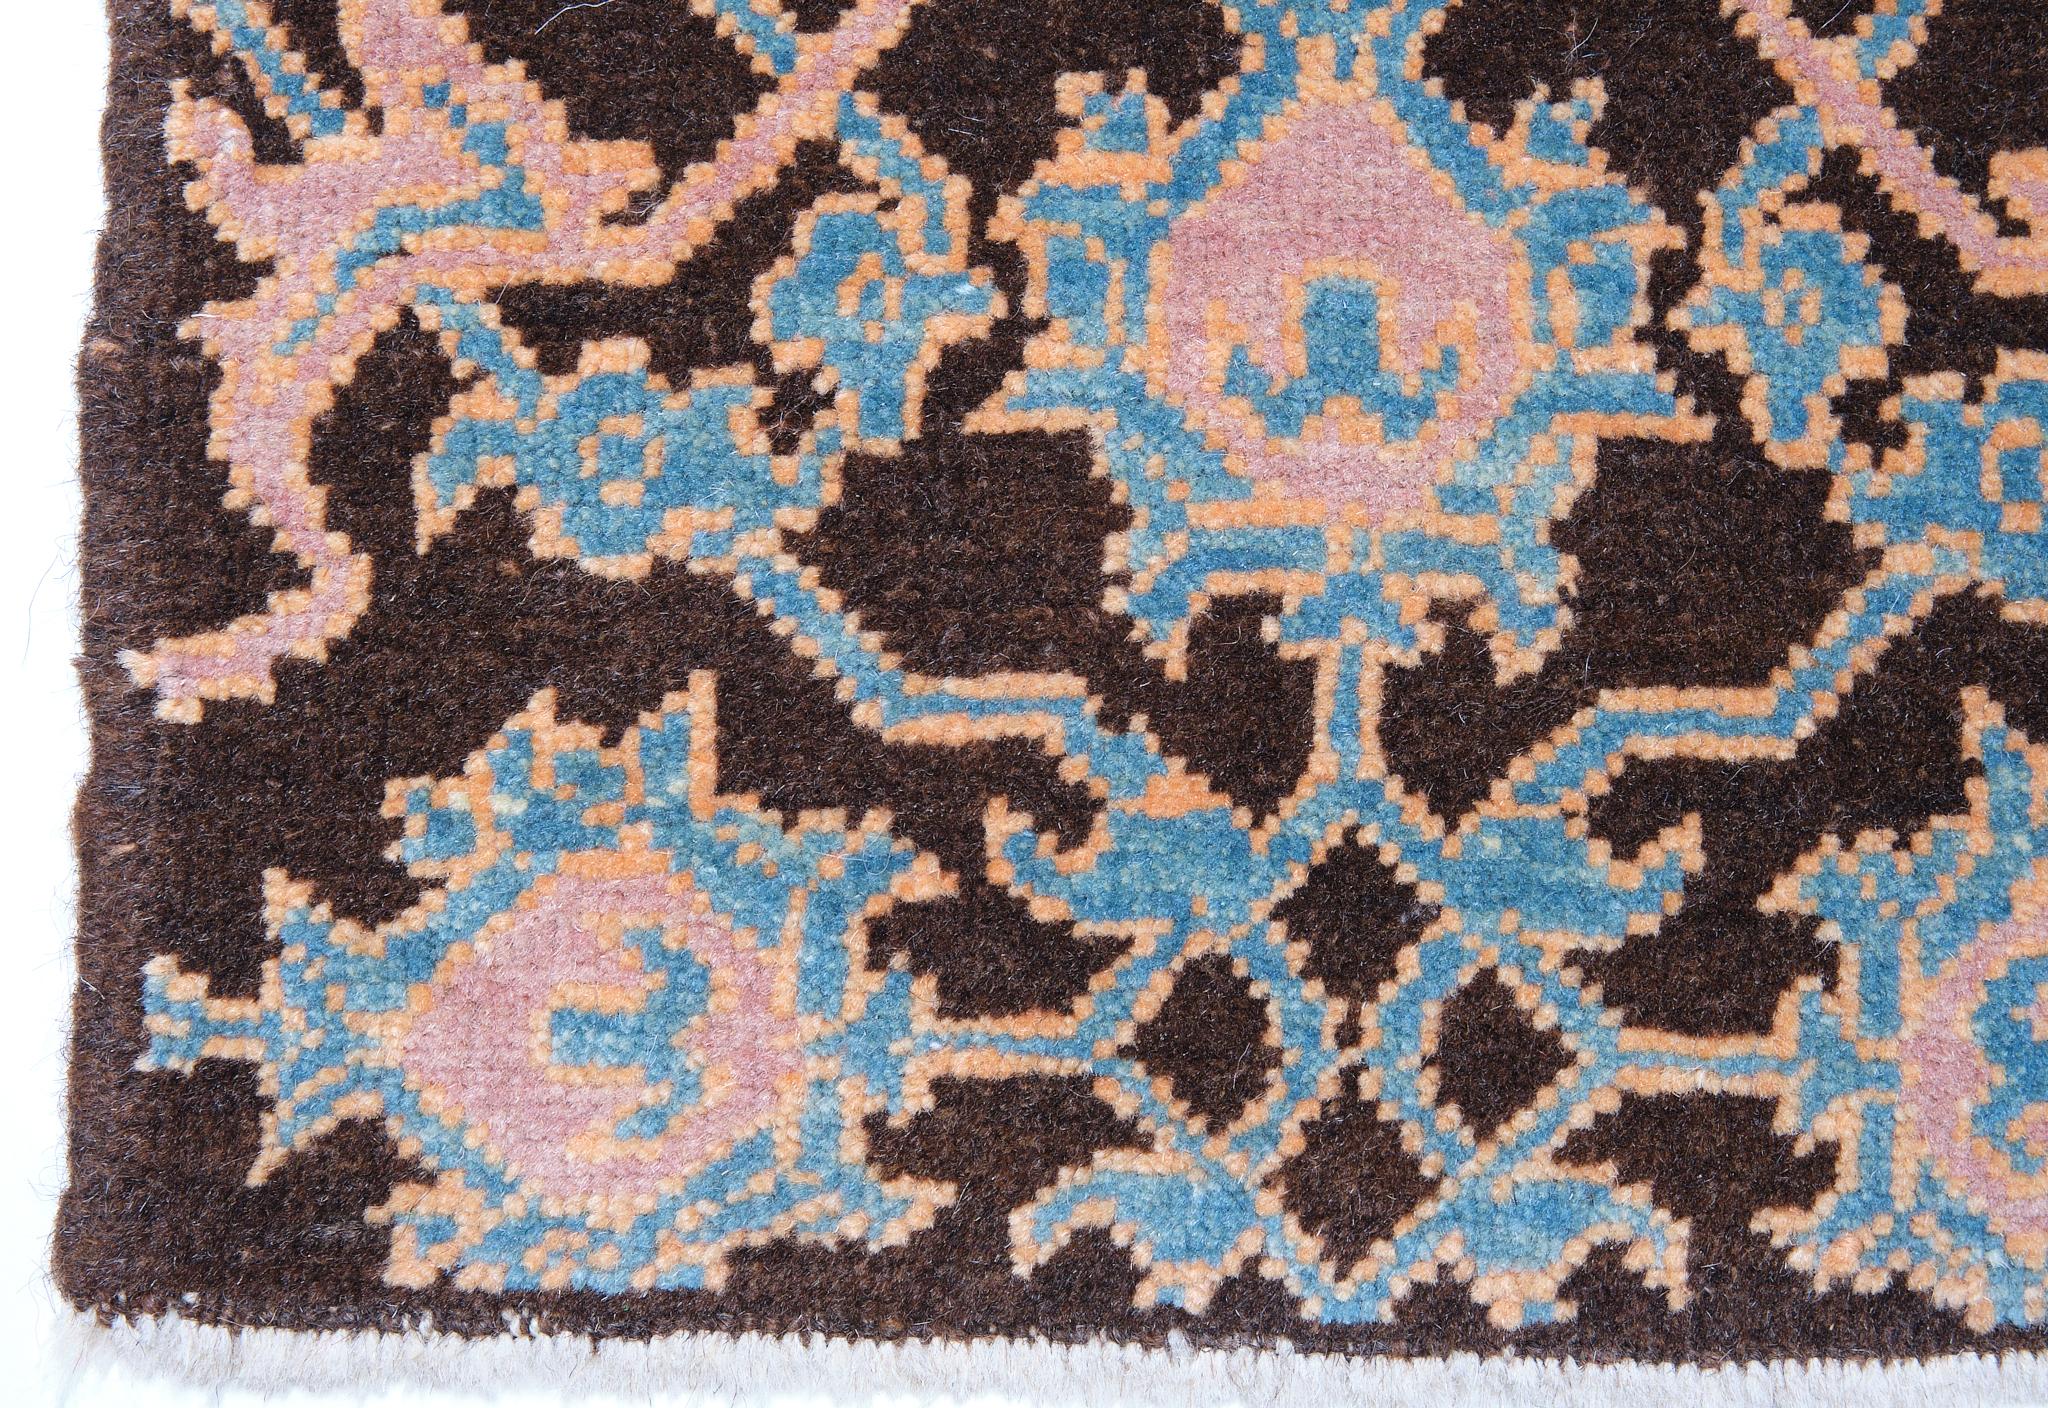 This rug has an interpreted design composed of a palmette lattice pattern taken from a part of the Mamluk rug, filling the field elegantly. These kinds of rugs have often been described as wagirehs or samplers and were said to have been used as